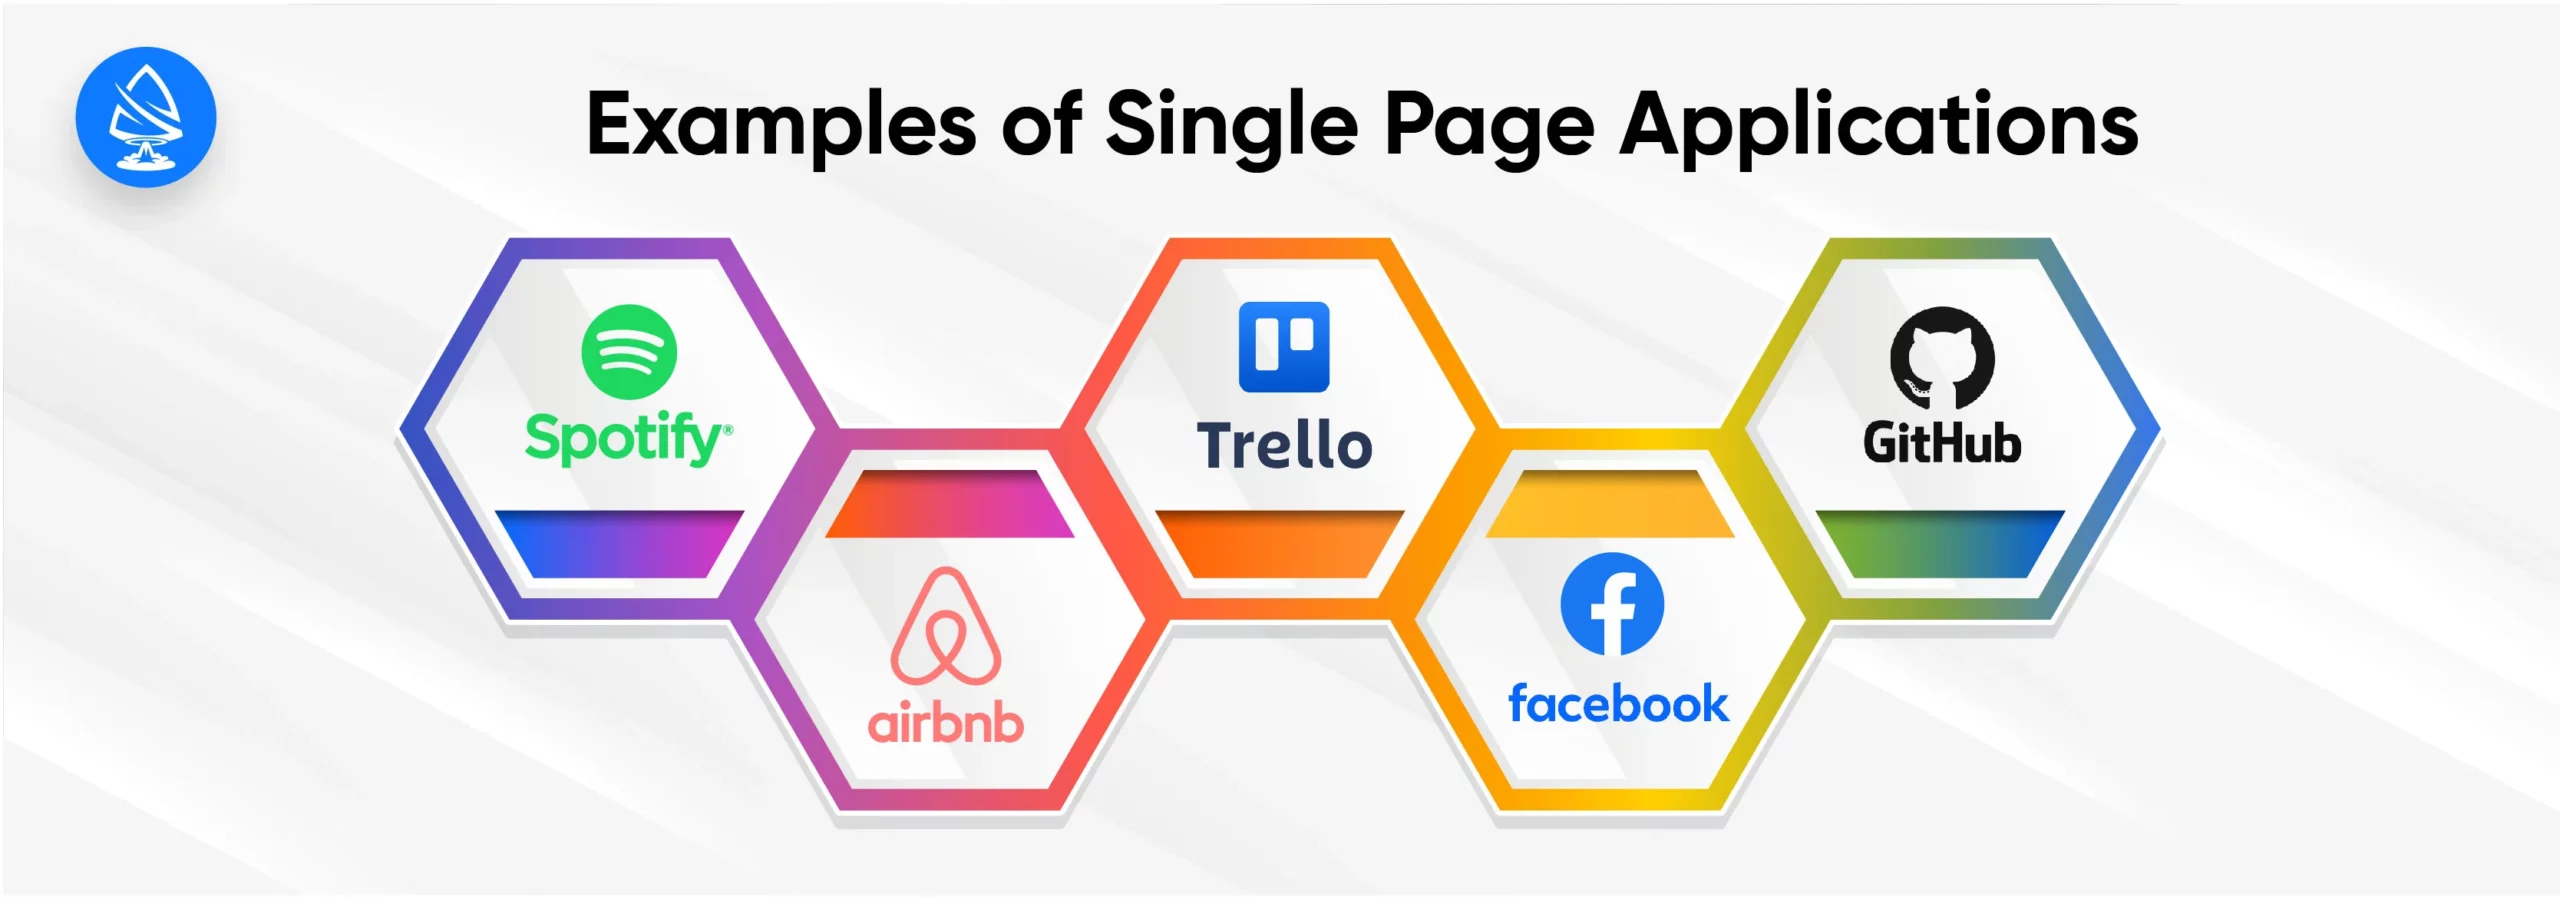 Examples of Single Page Applications